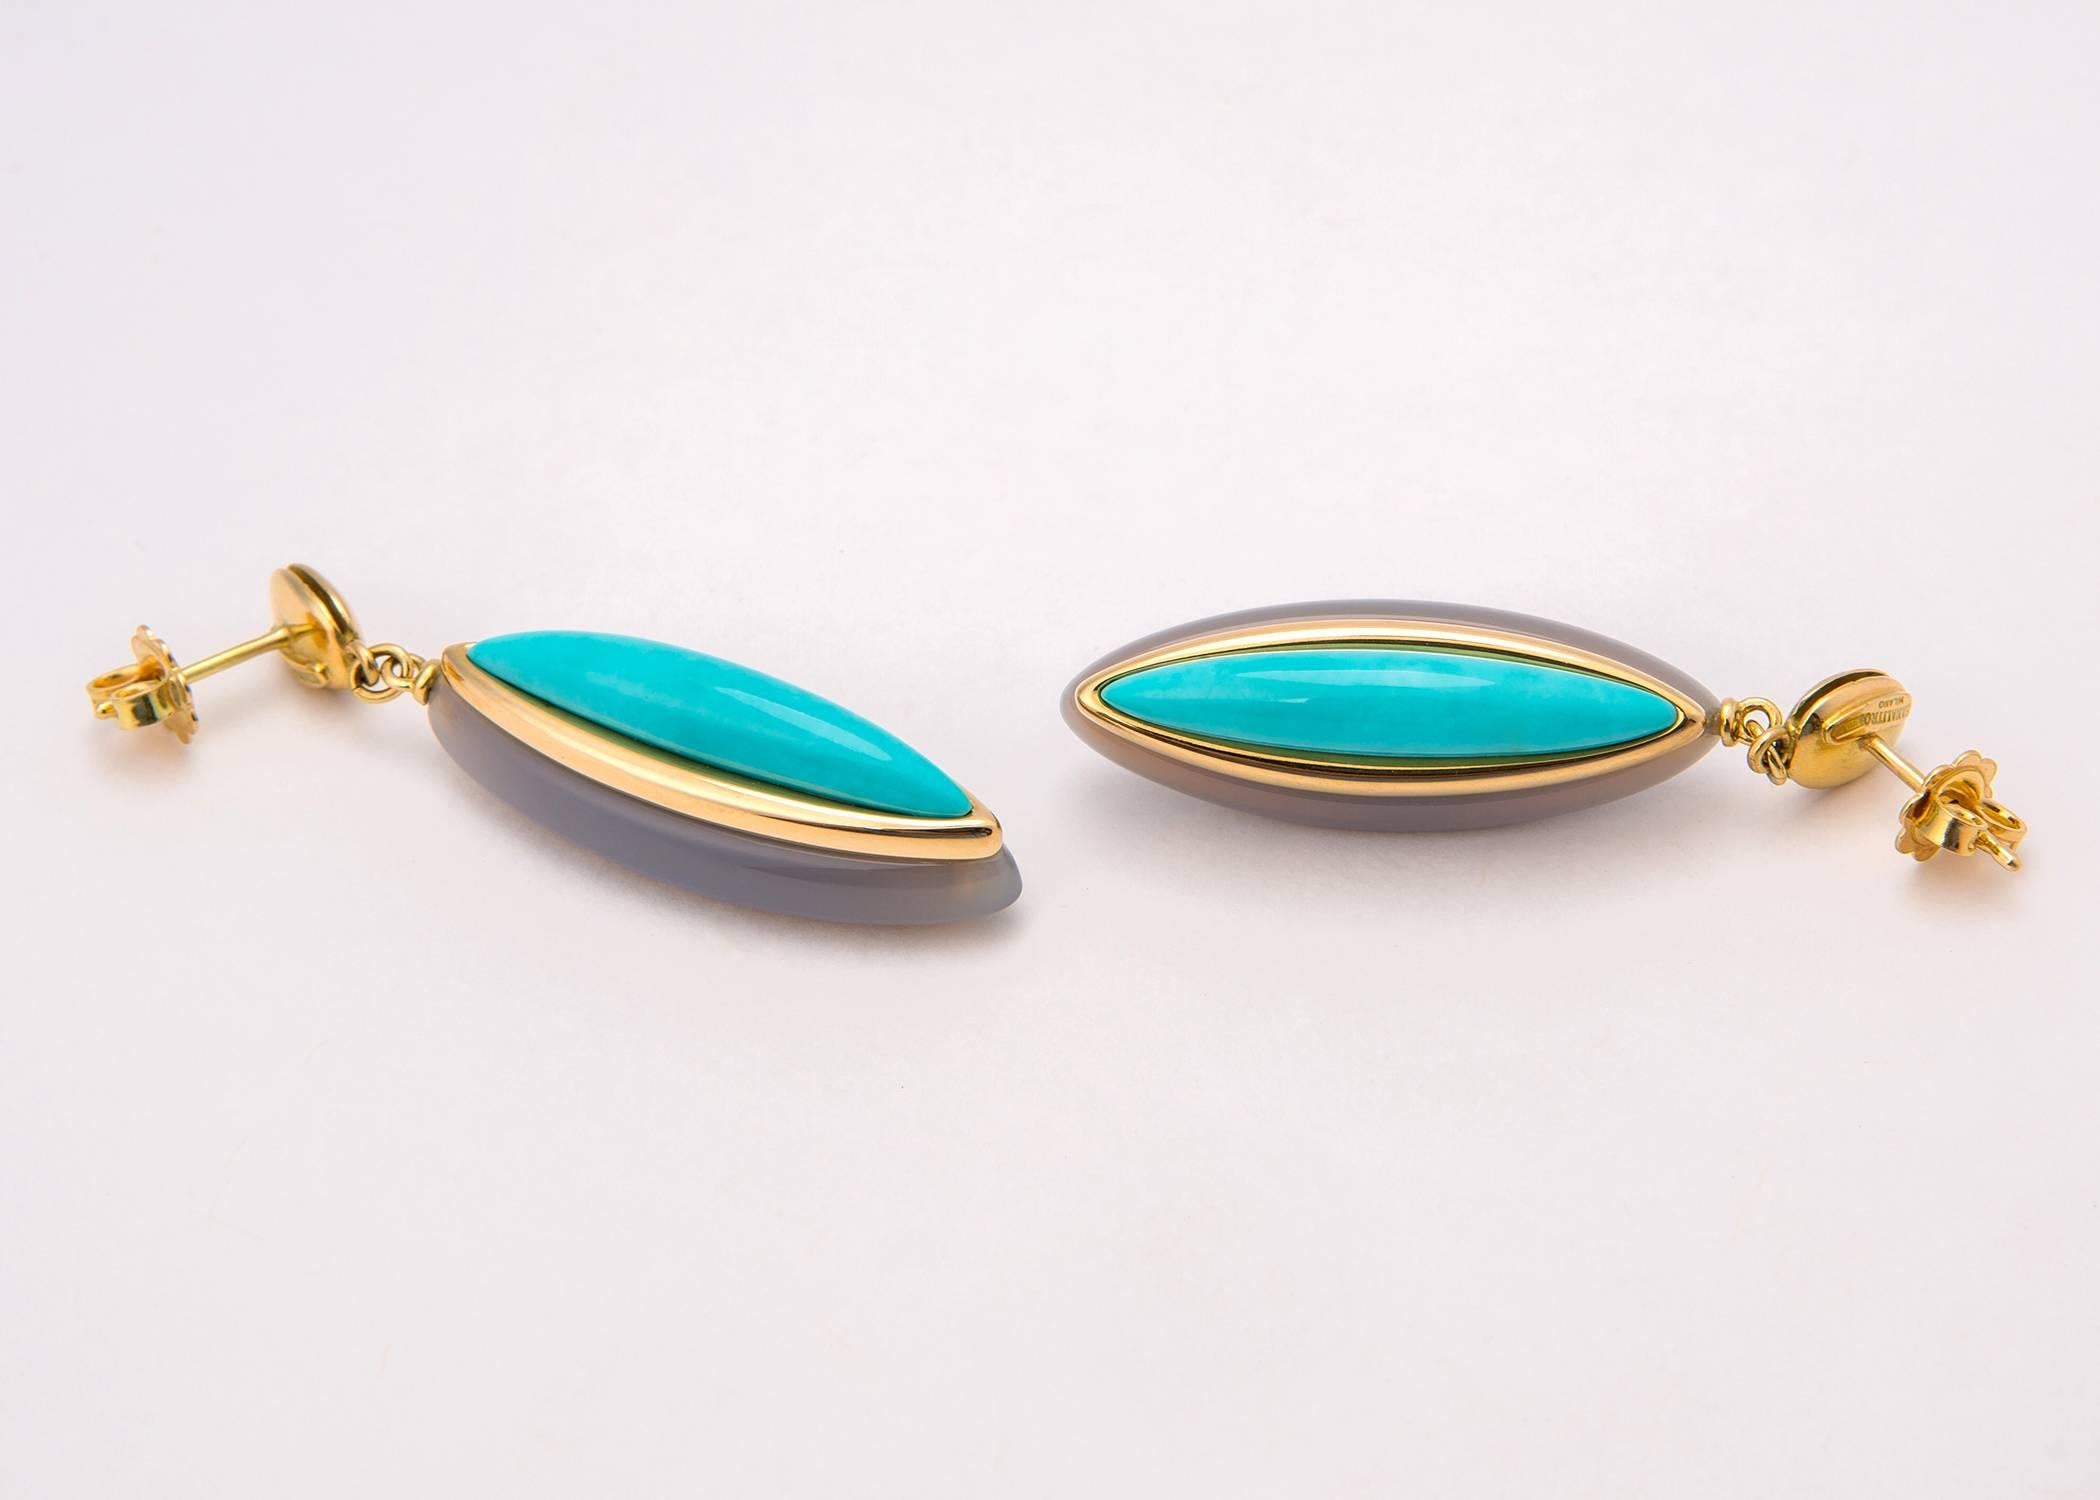 Simply Chic. Vivid turquoise is set against grey agate and framed with rich 18k gold. Handmade in Italy. Please view additional picture to see the profile dimension. 2 inches in length. 